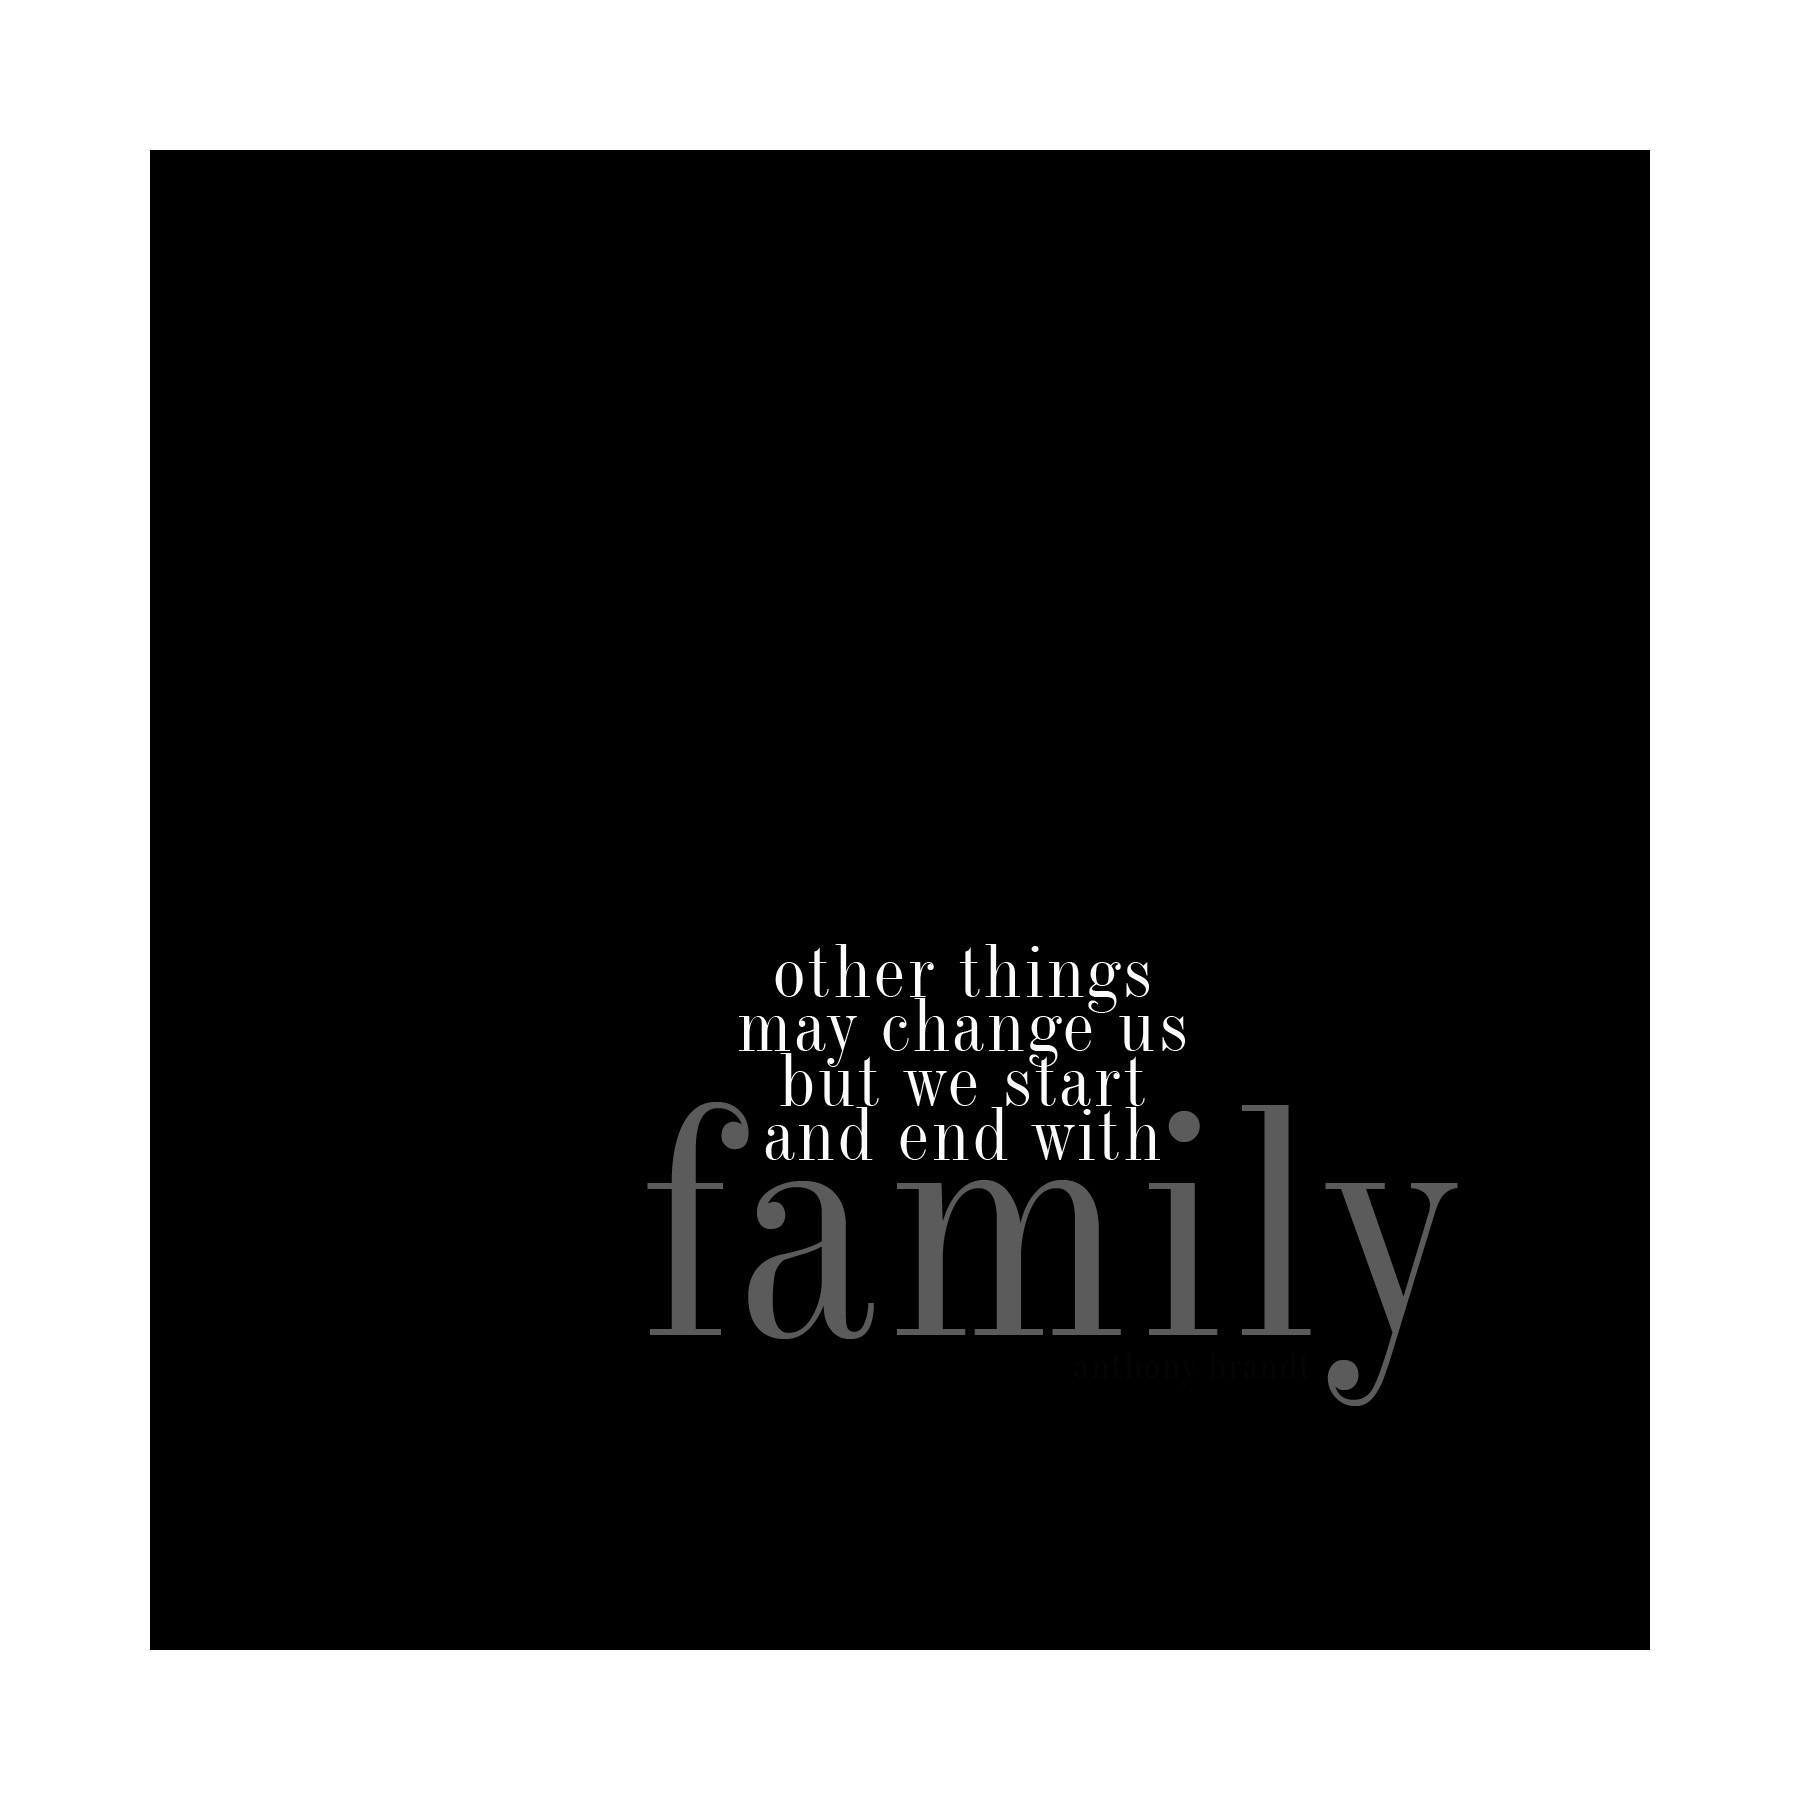 Family Image Quotes
 family quote 1